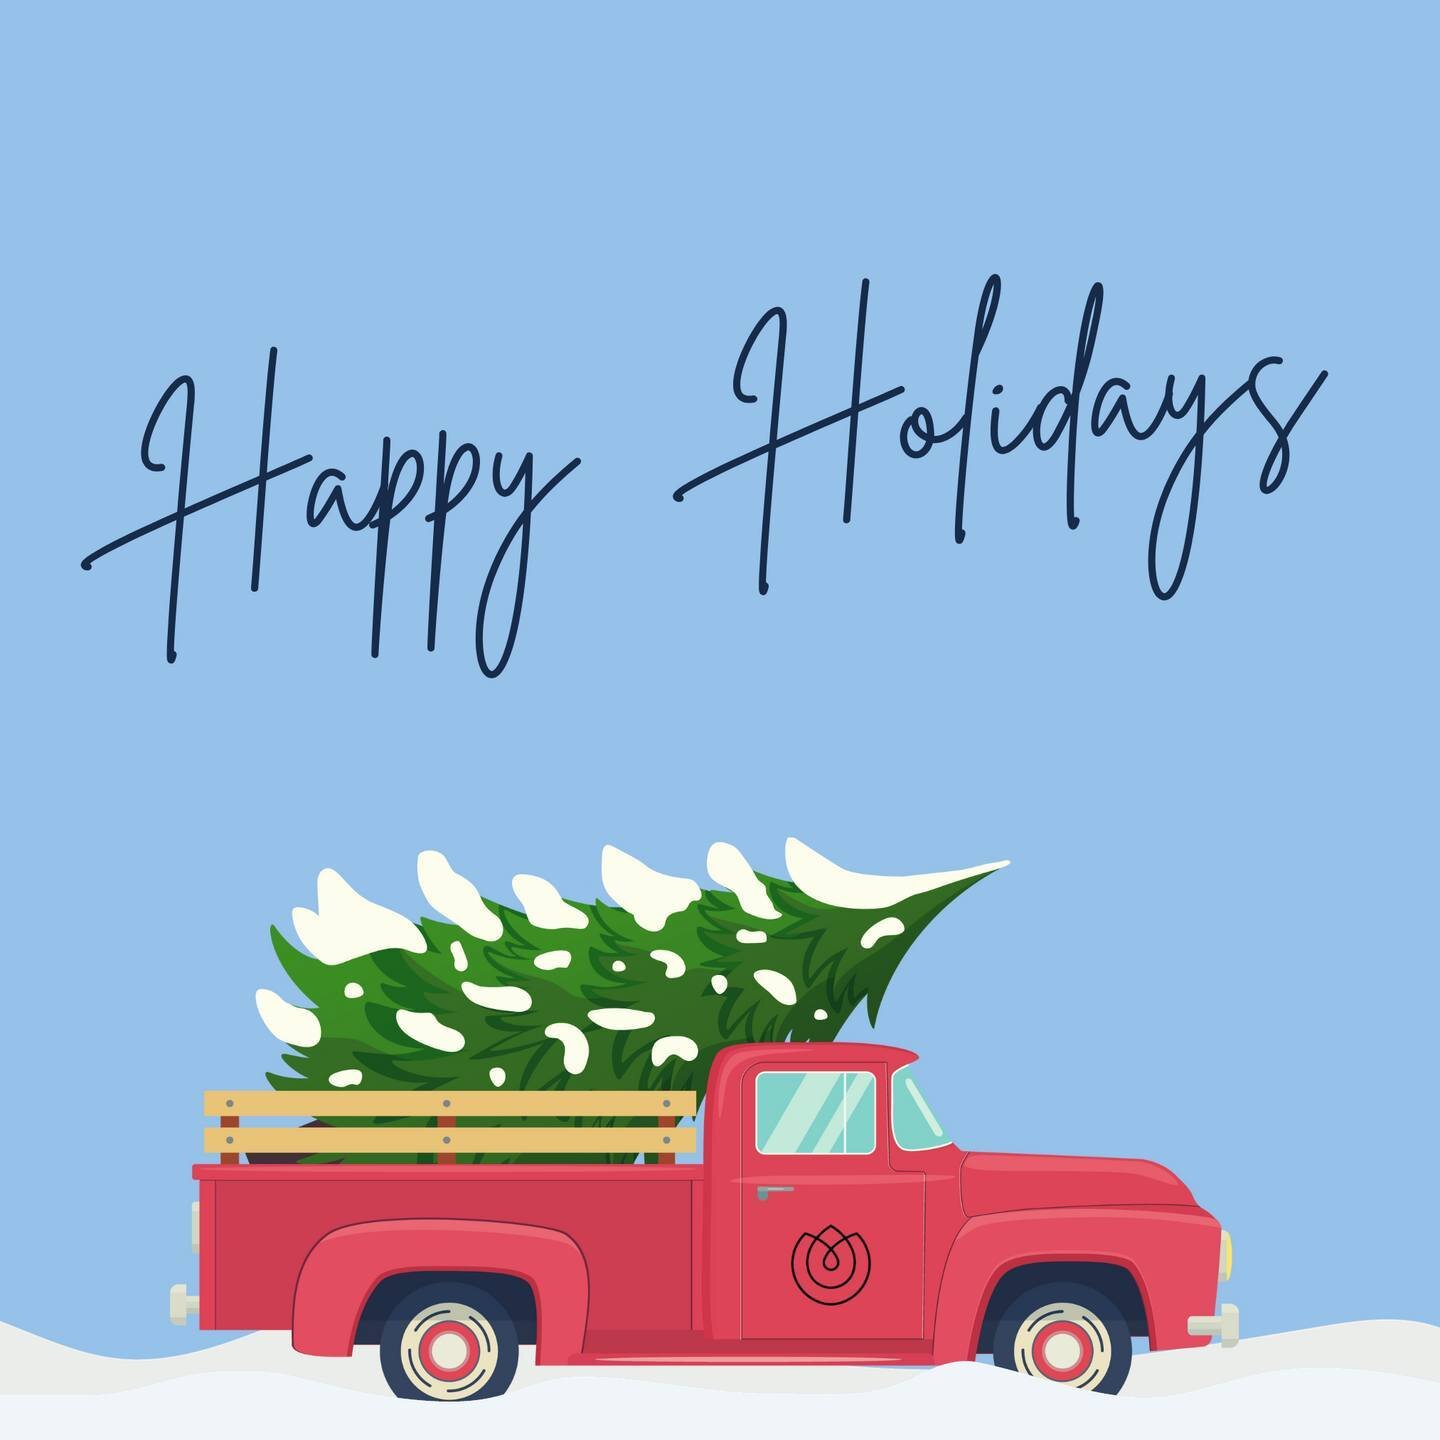 Happy Holidays from Flowerhill 🌟🎁 Wishing you and your loved ones a season filled with joy, laughter, and warmth. May the spirit of the holidays bring you moments of happiness and togetherness. Thank you for being a part of our wonderful community 